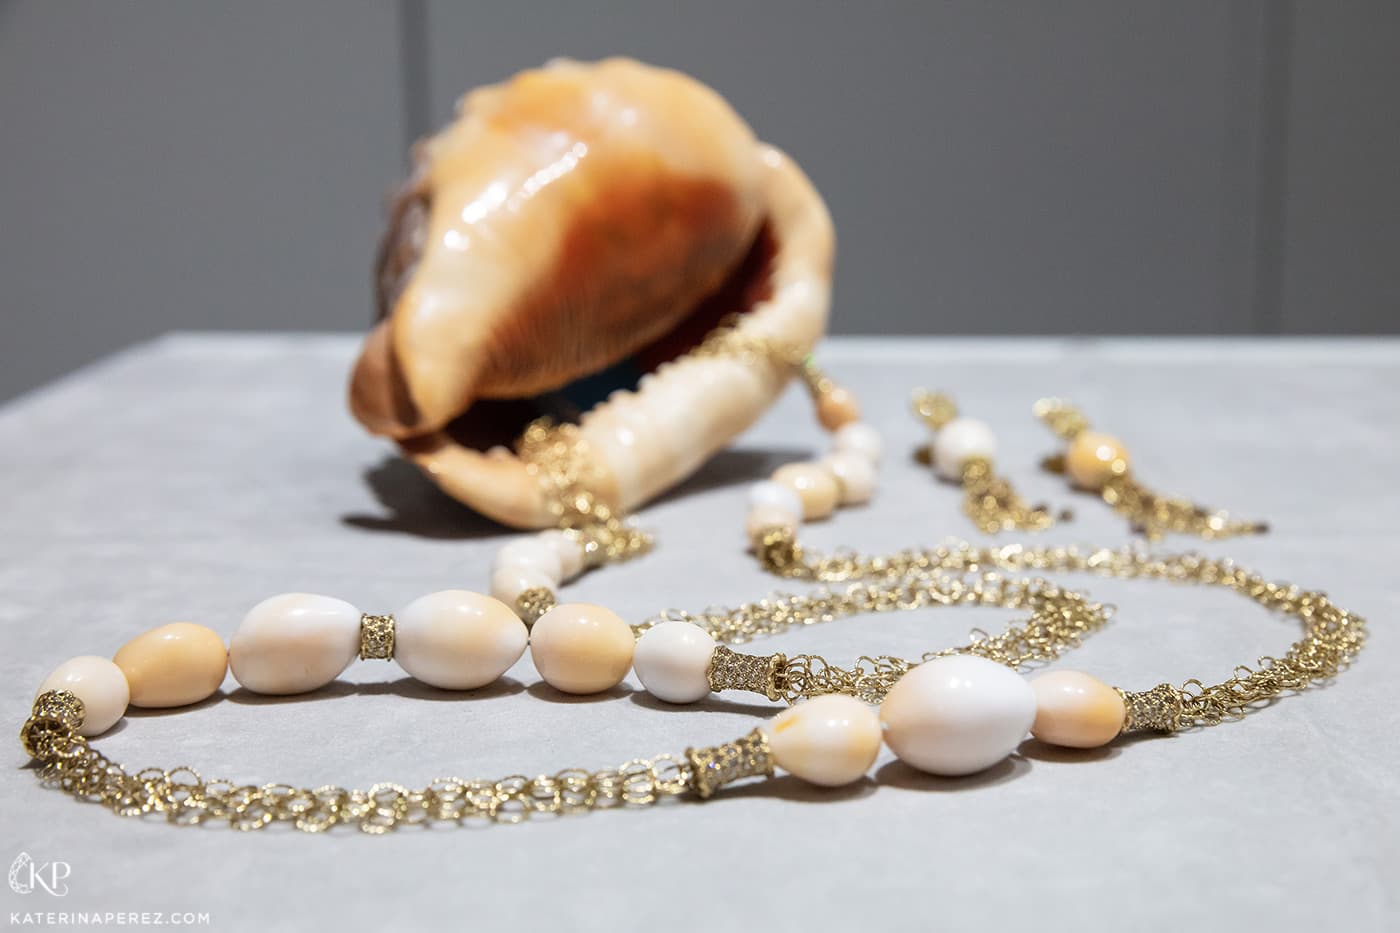 Shanghai Gems necklace and earrings with Cassis pearls and diamonds in yellow gold